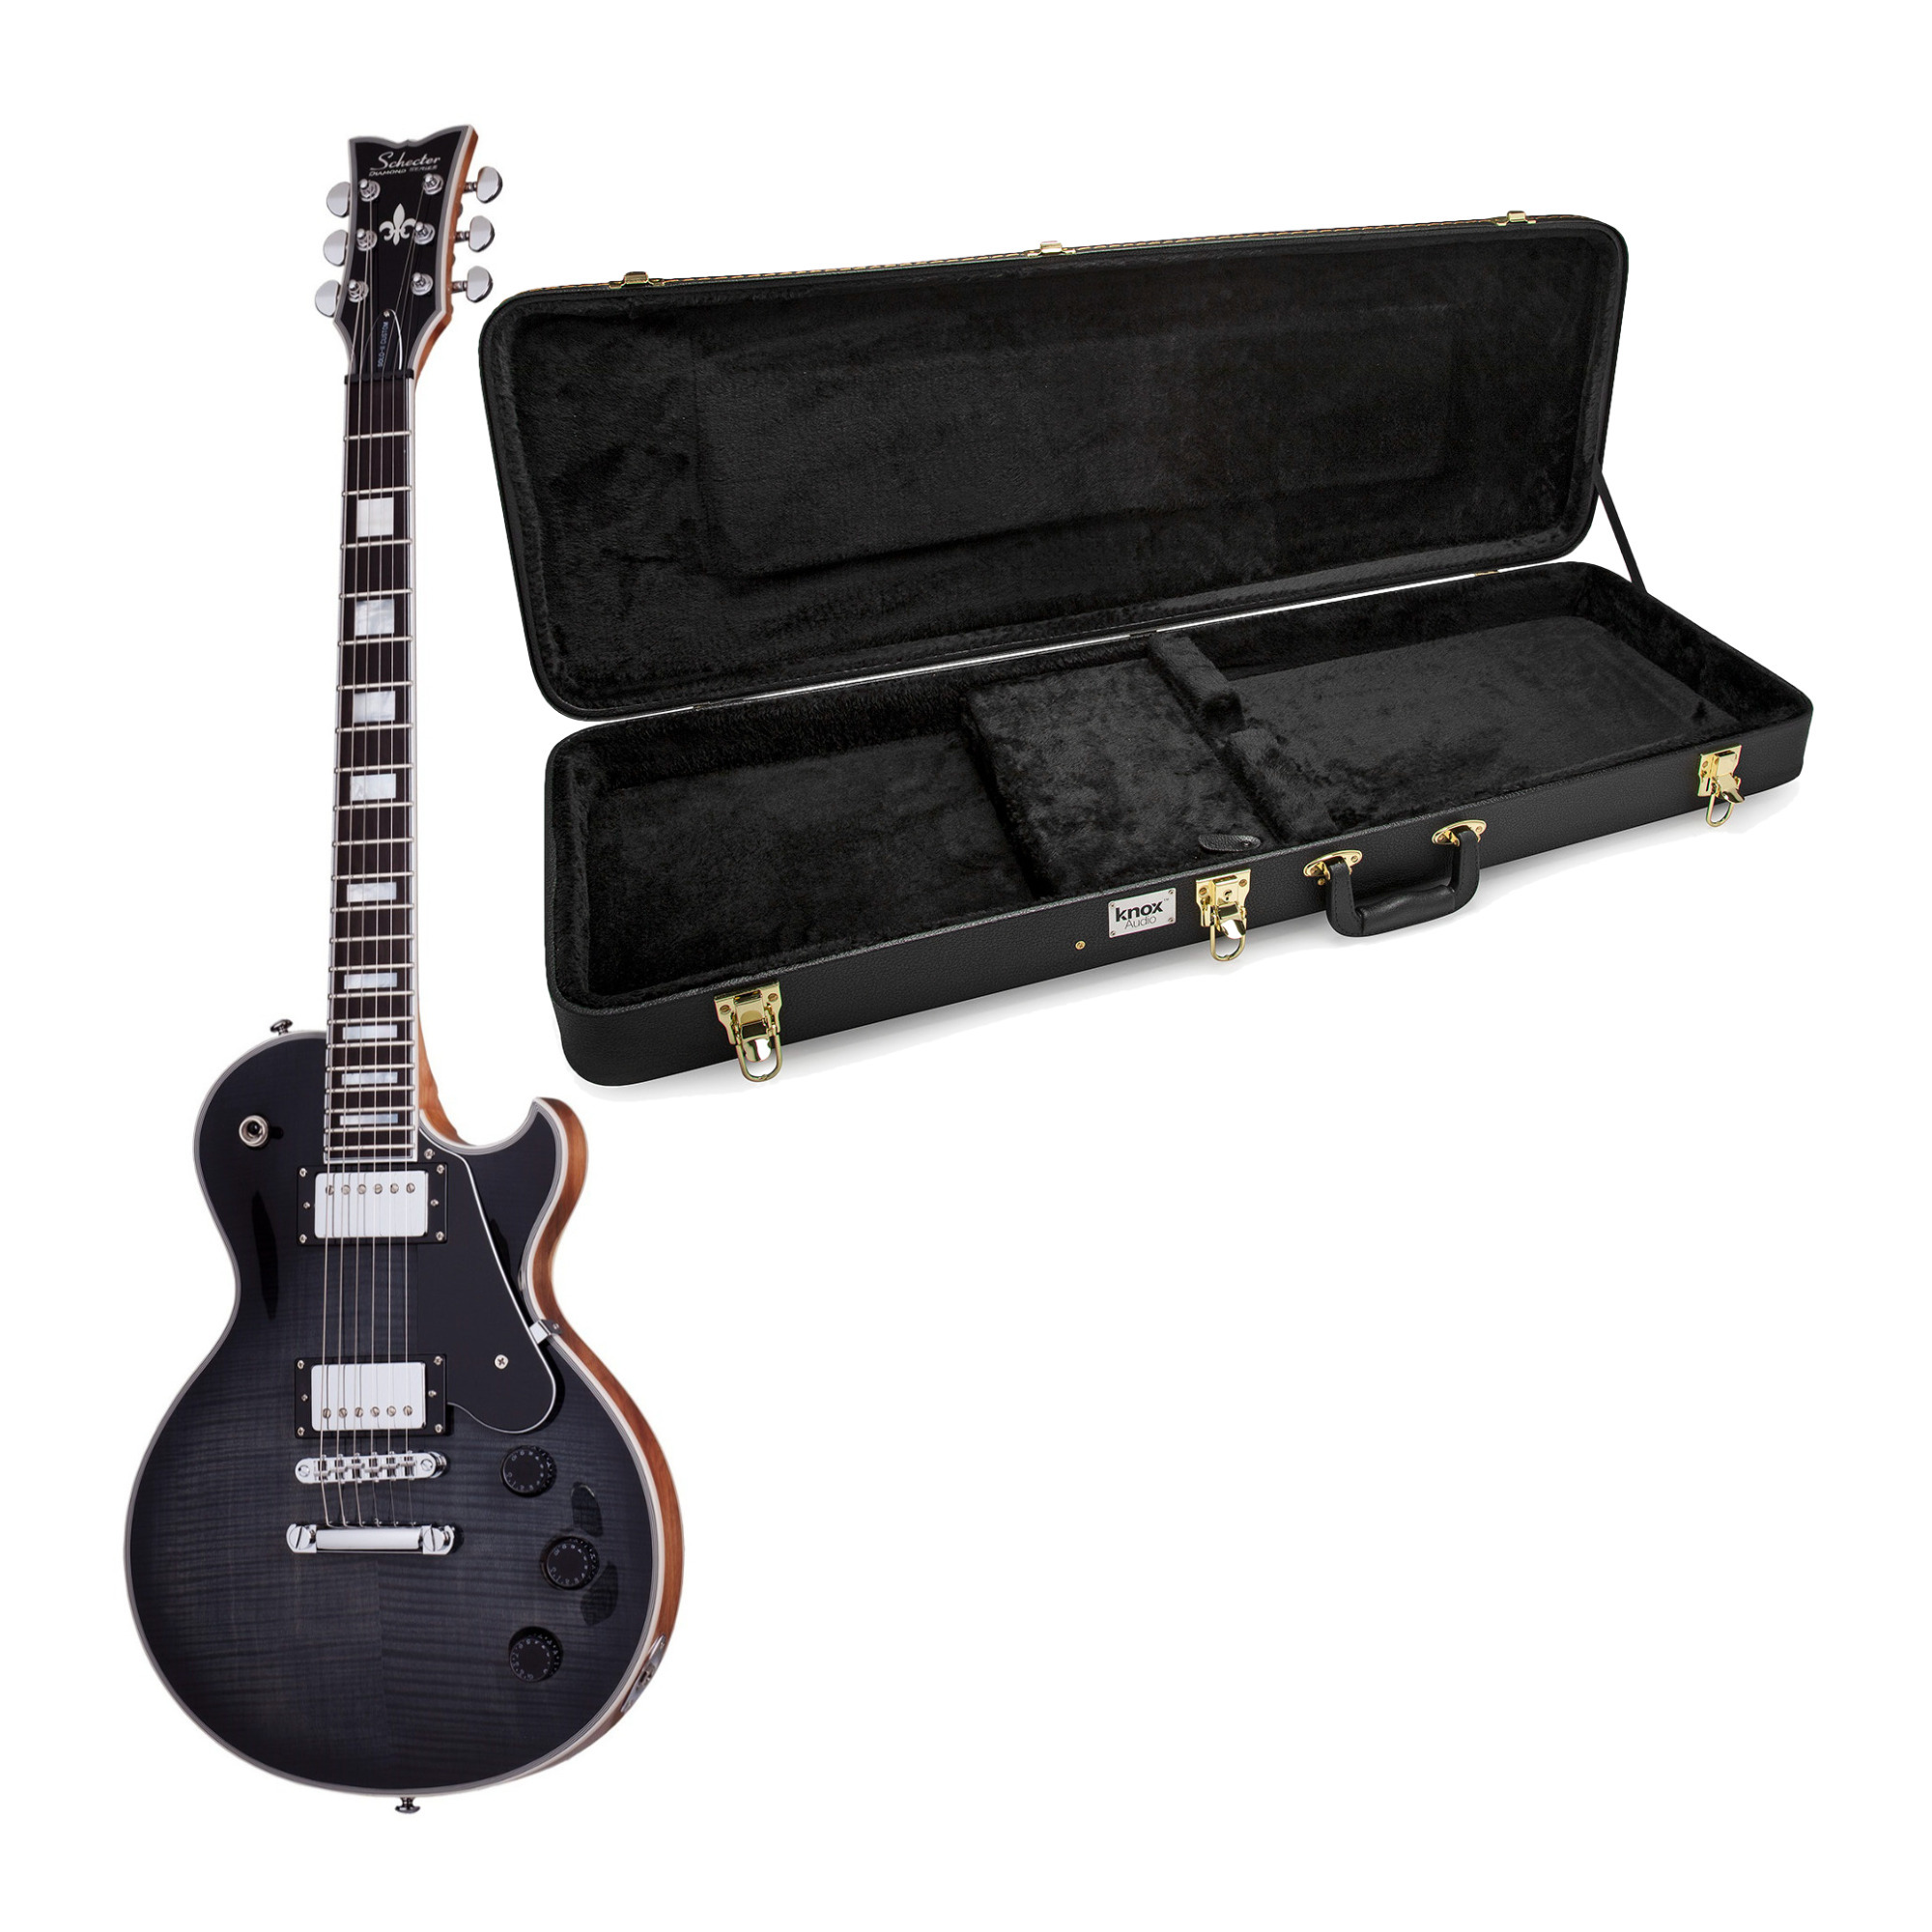 Schecter Solo-II Custom 6-String Electric Guitar (Trans Black Satin) with Hard Shell Case -  ASGR-659K1